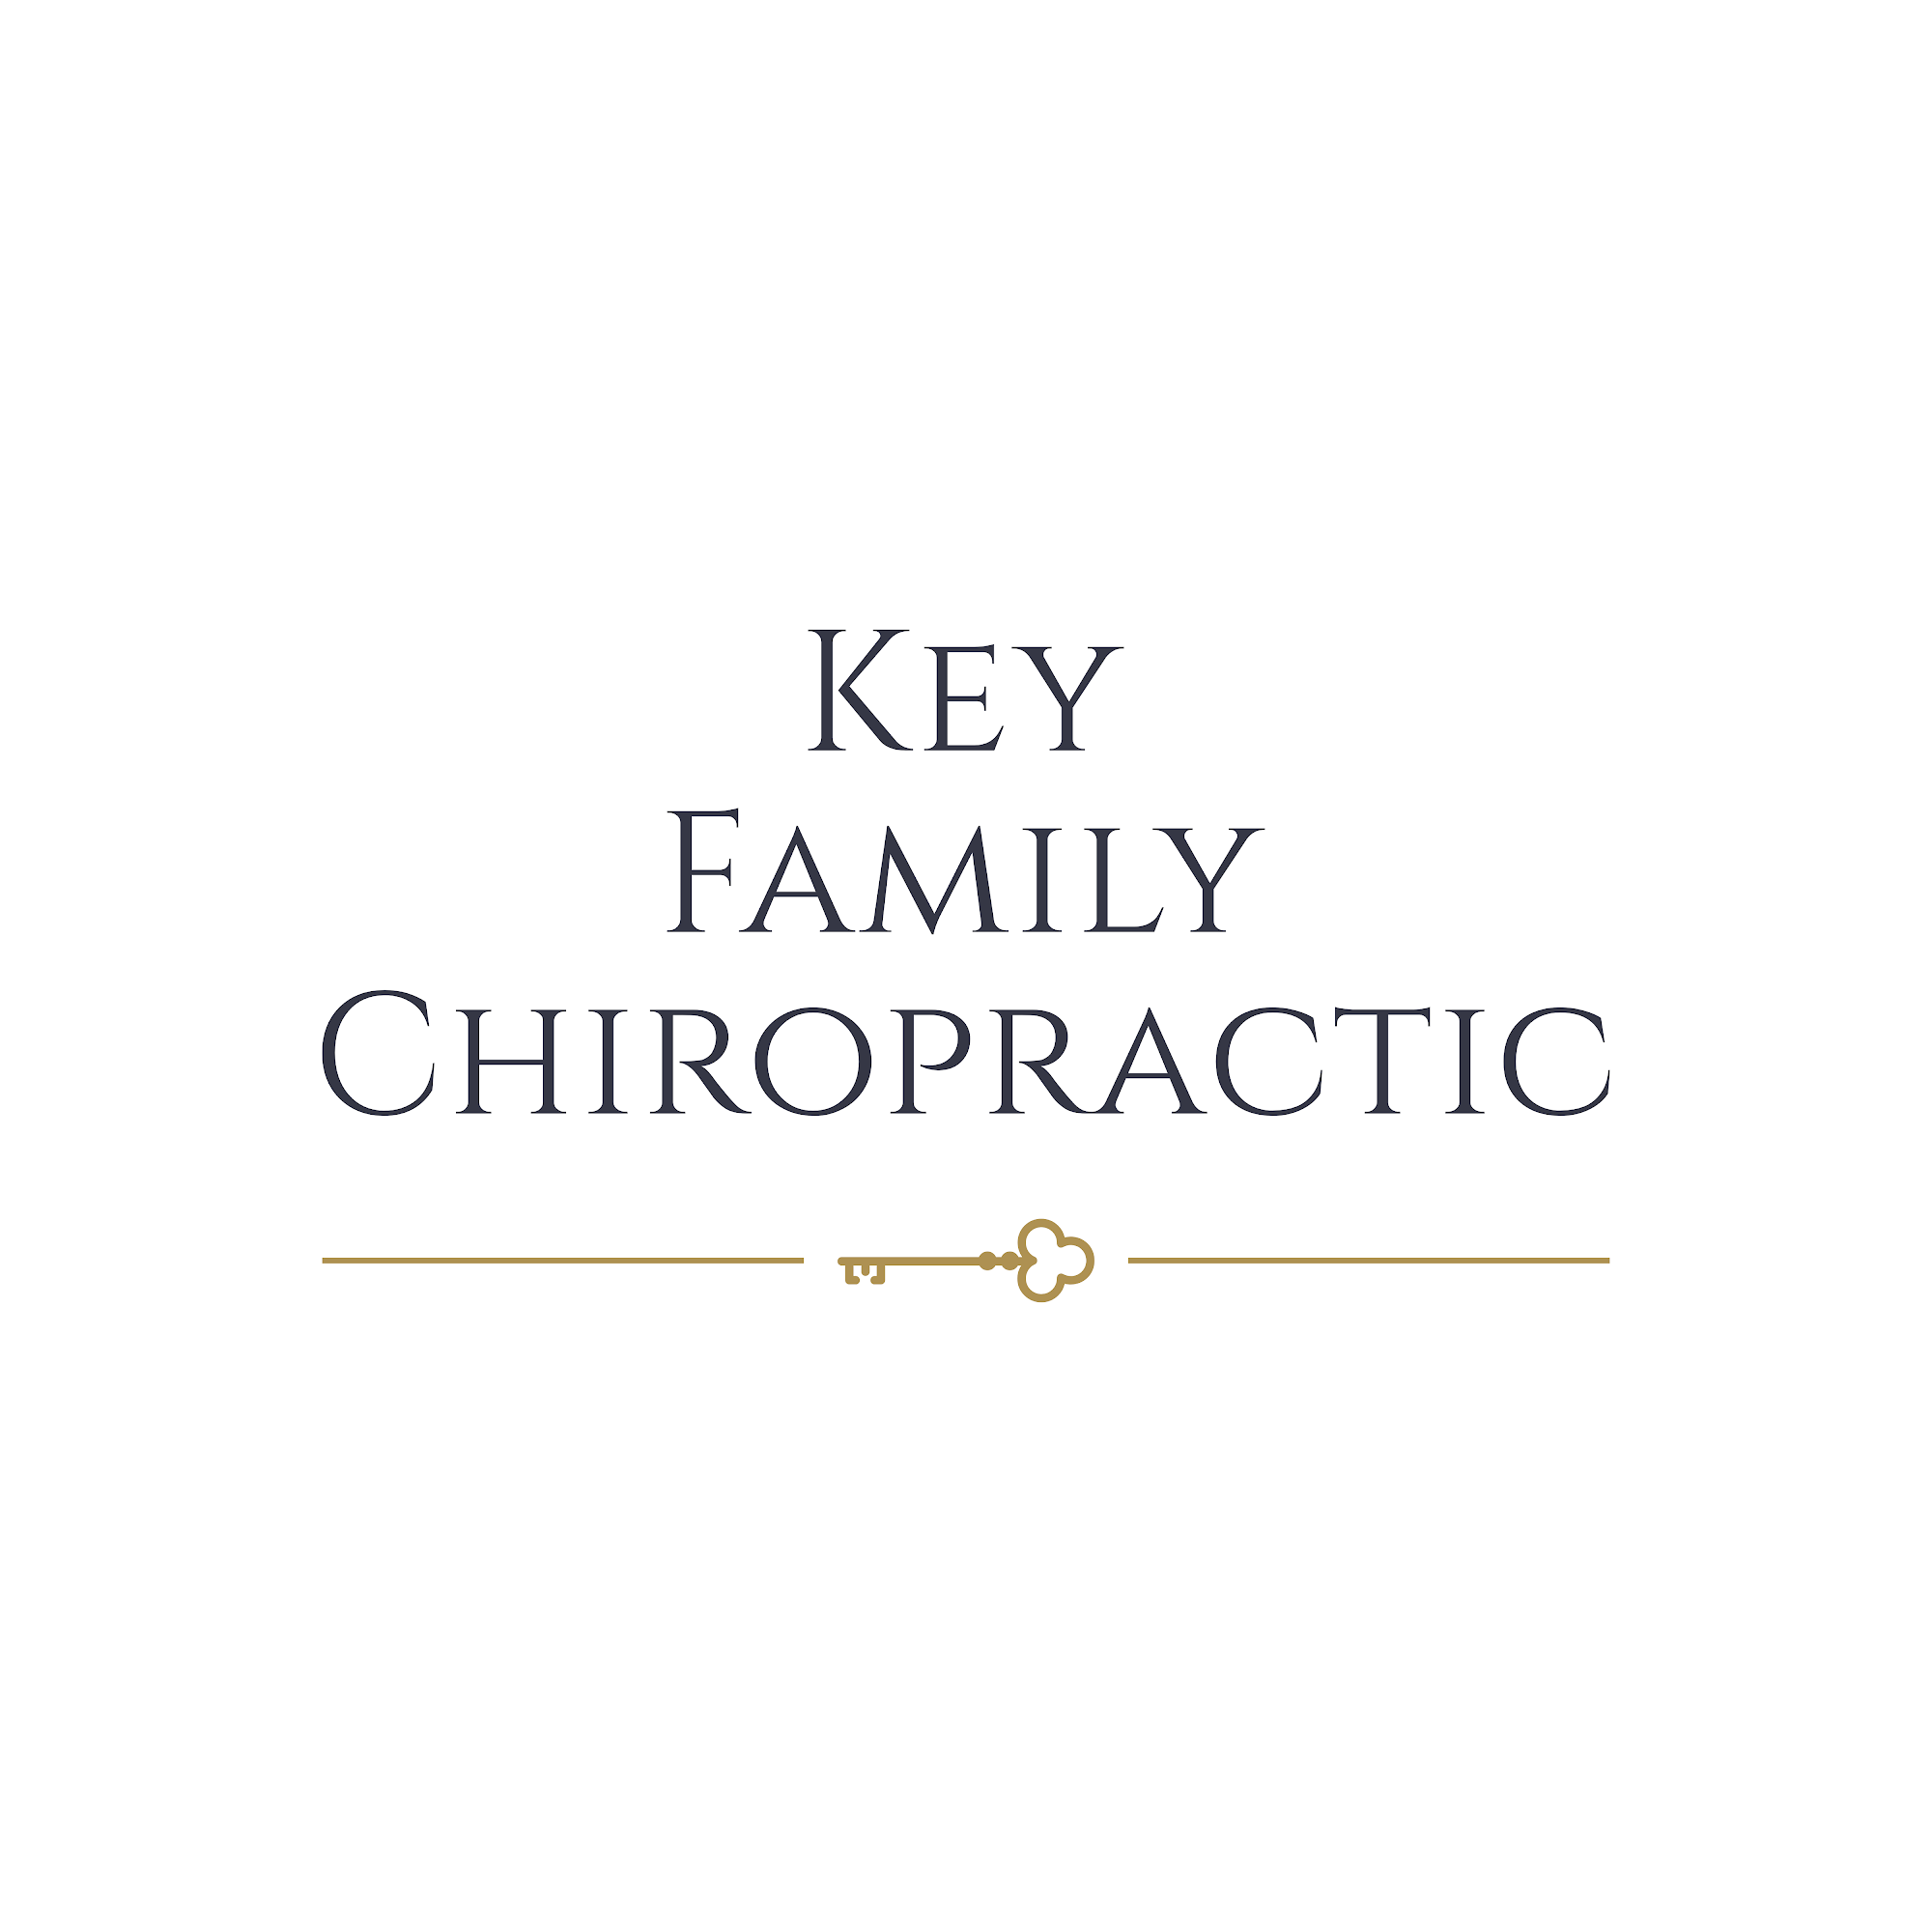 Key Family Chiropractic 1015 N Columbia St, Union City Indiana 47390